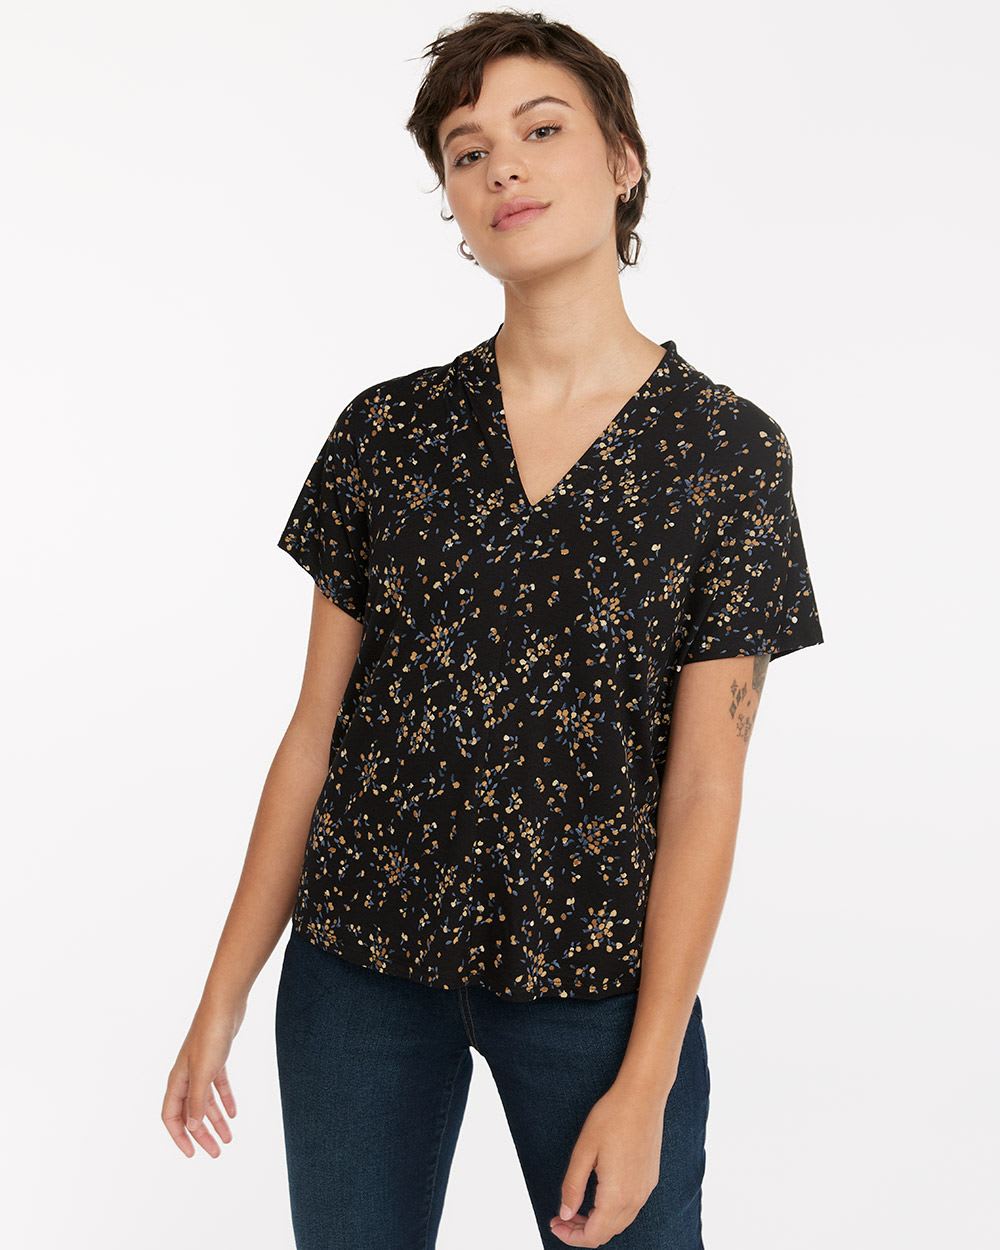 Printed V-Neck Top with Extended Sleeves